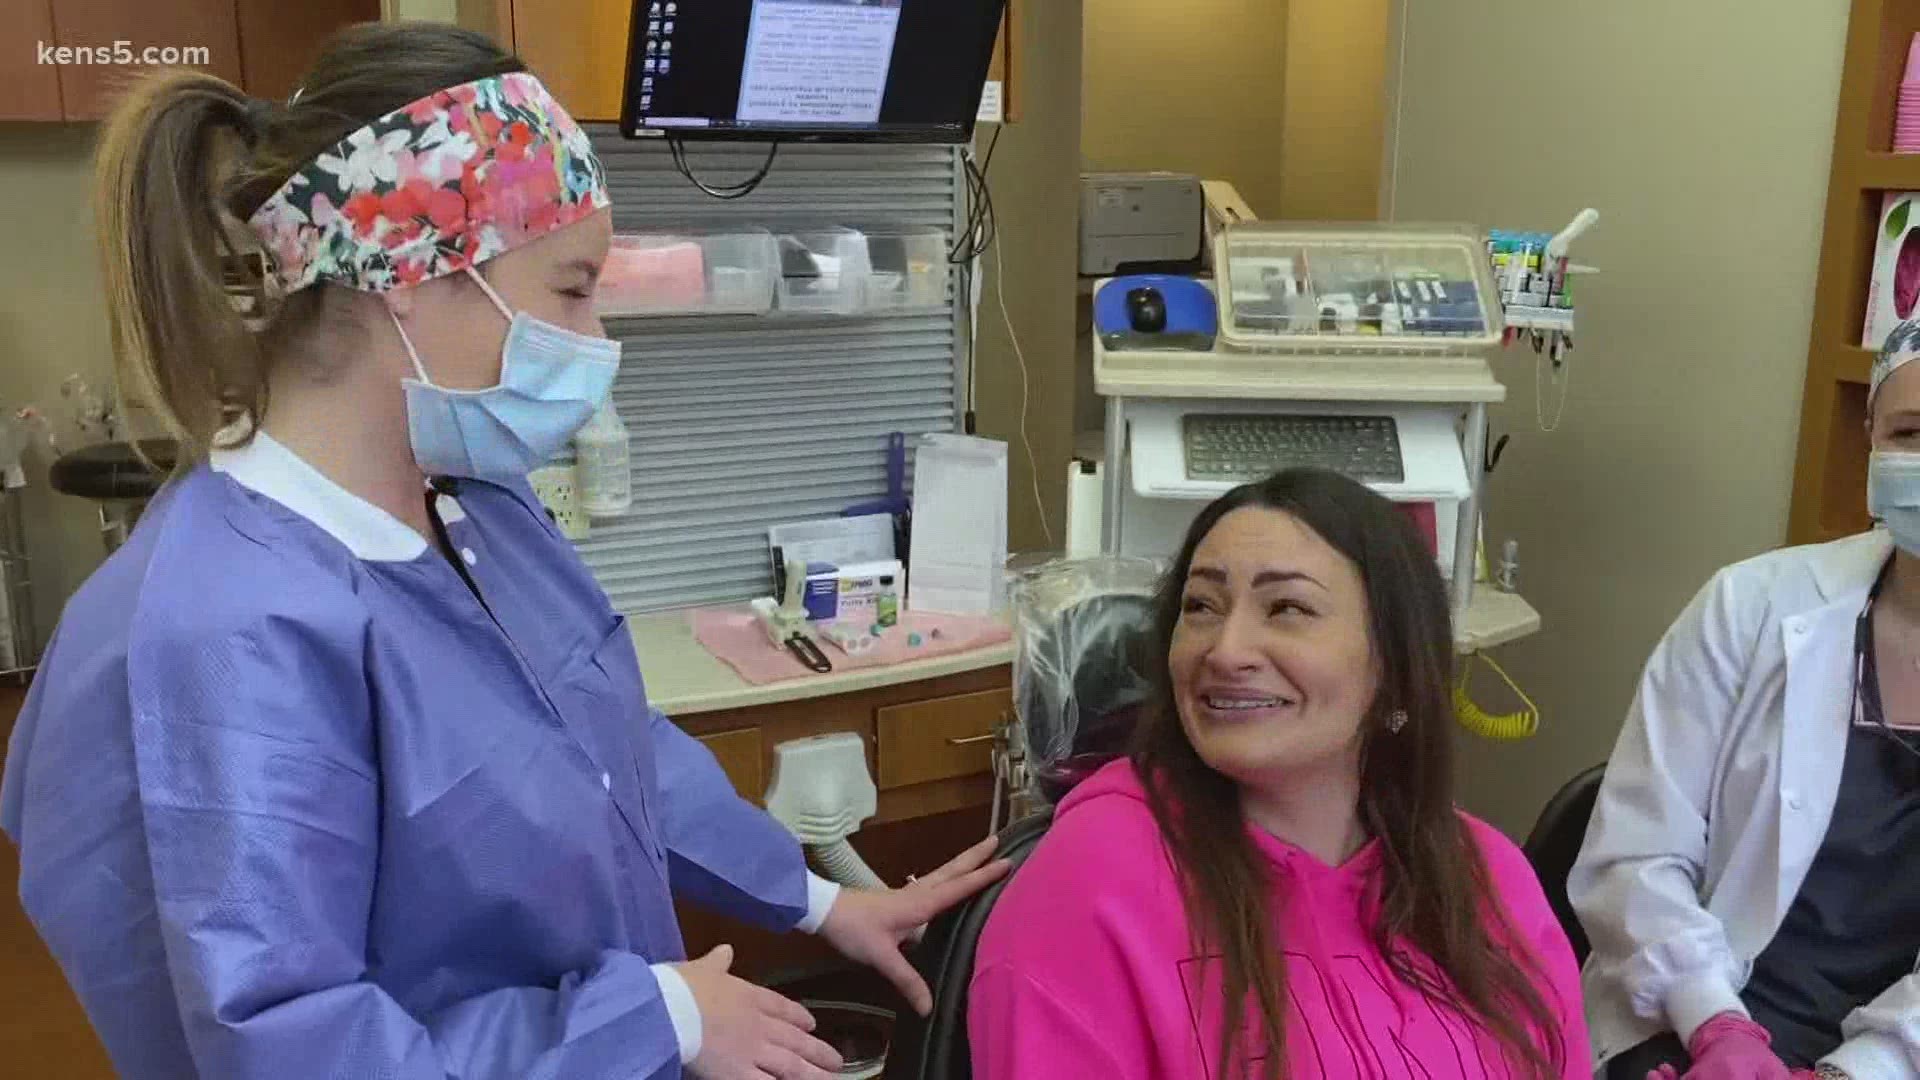 A few lucky San Antonioans won't have to pay one cent of the dental bills after receiving life-changing work.